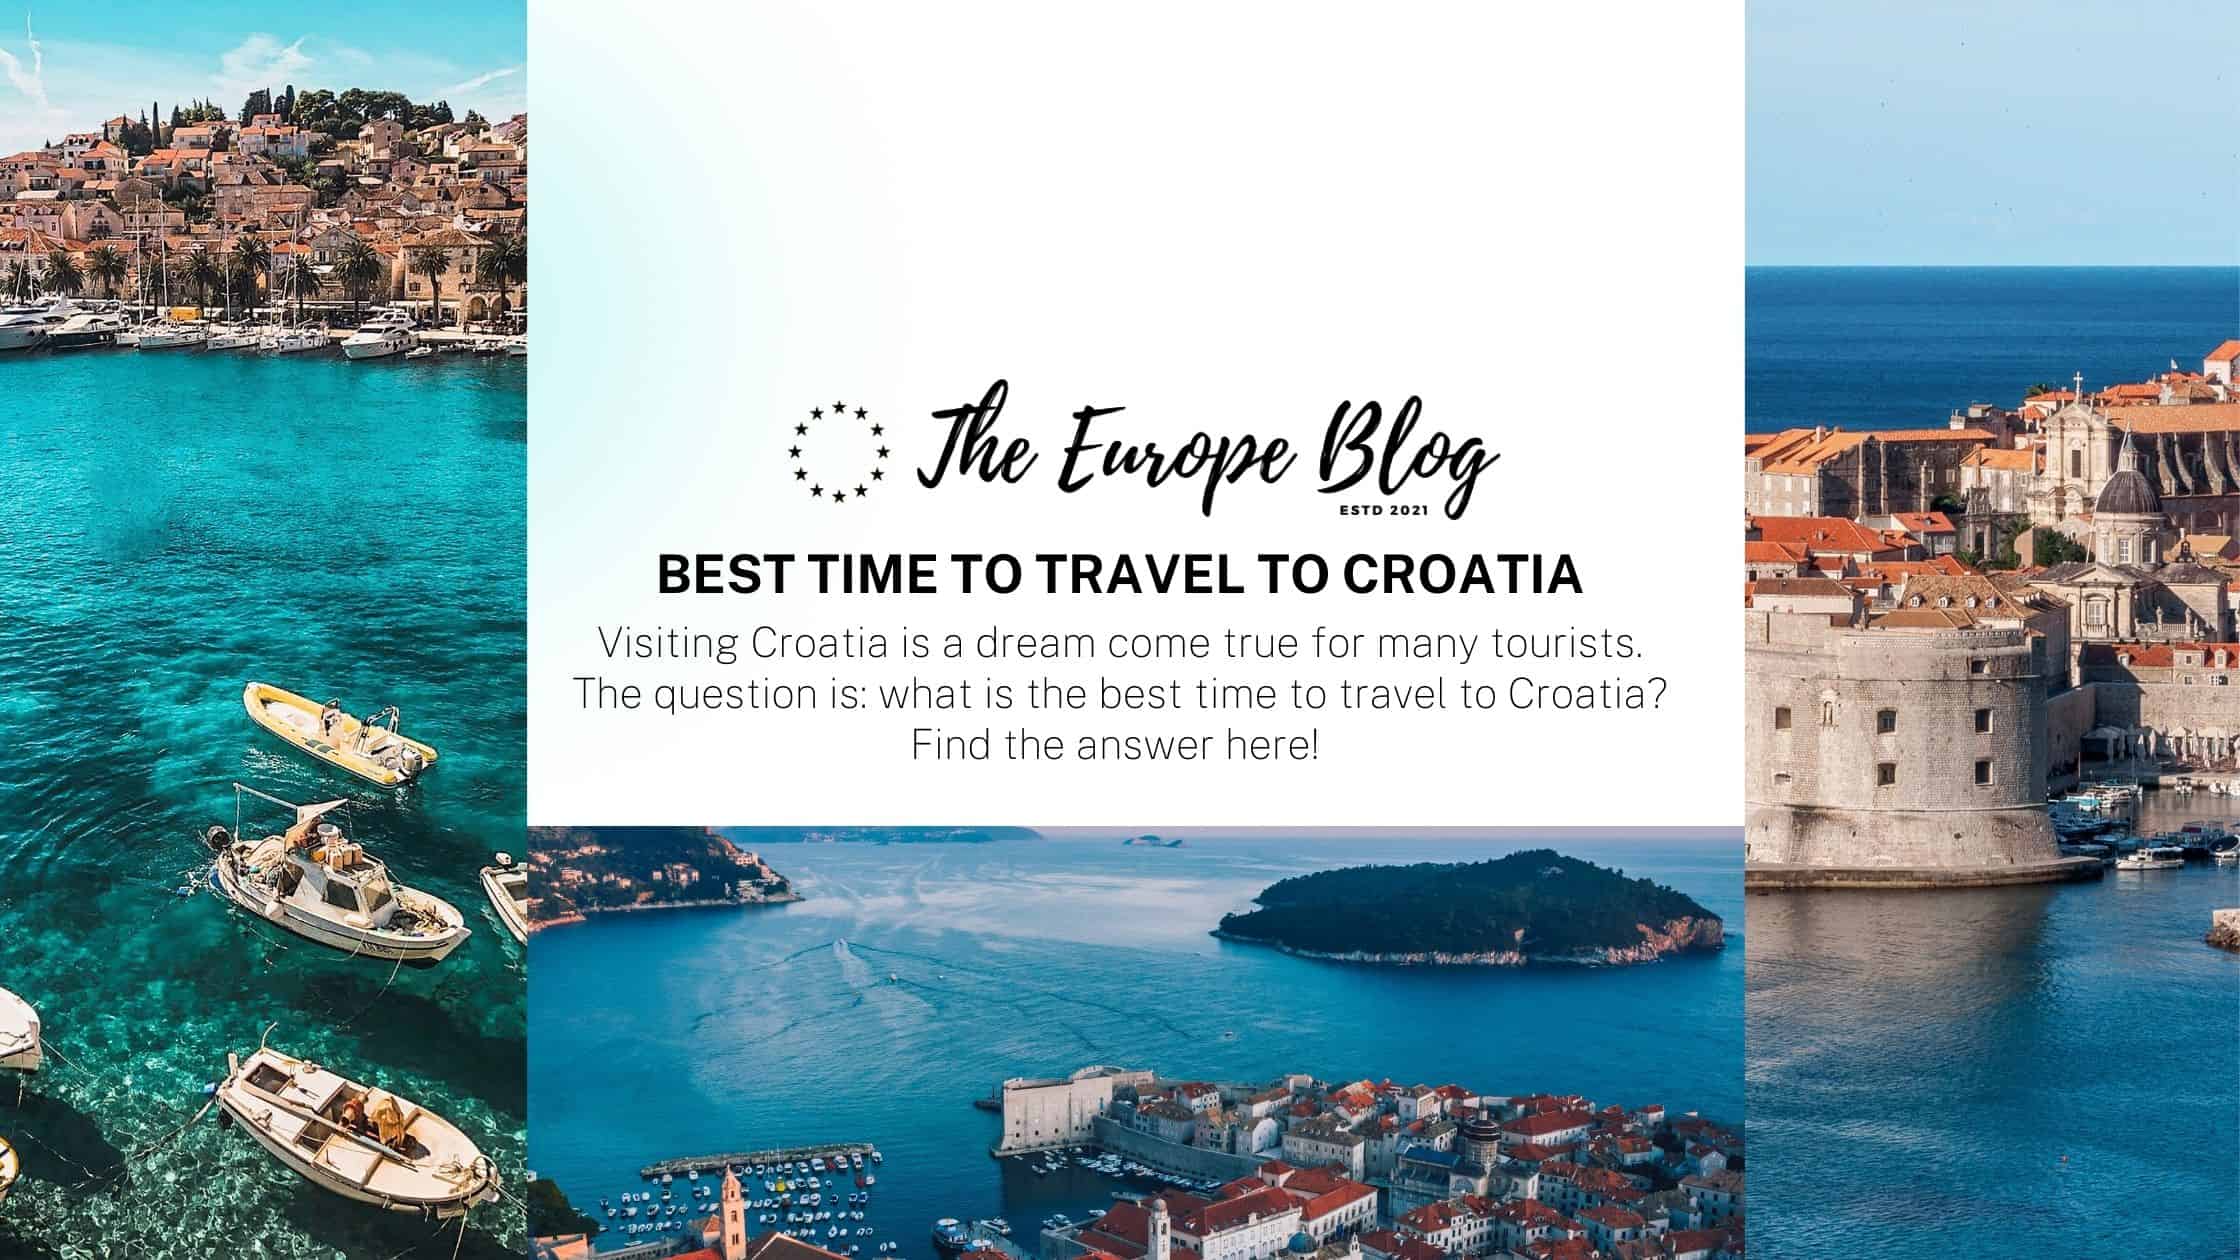 Best Time to Travel to Croatia